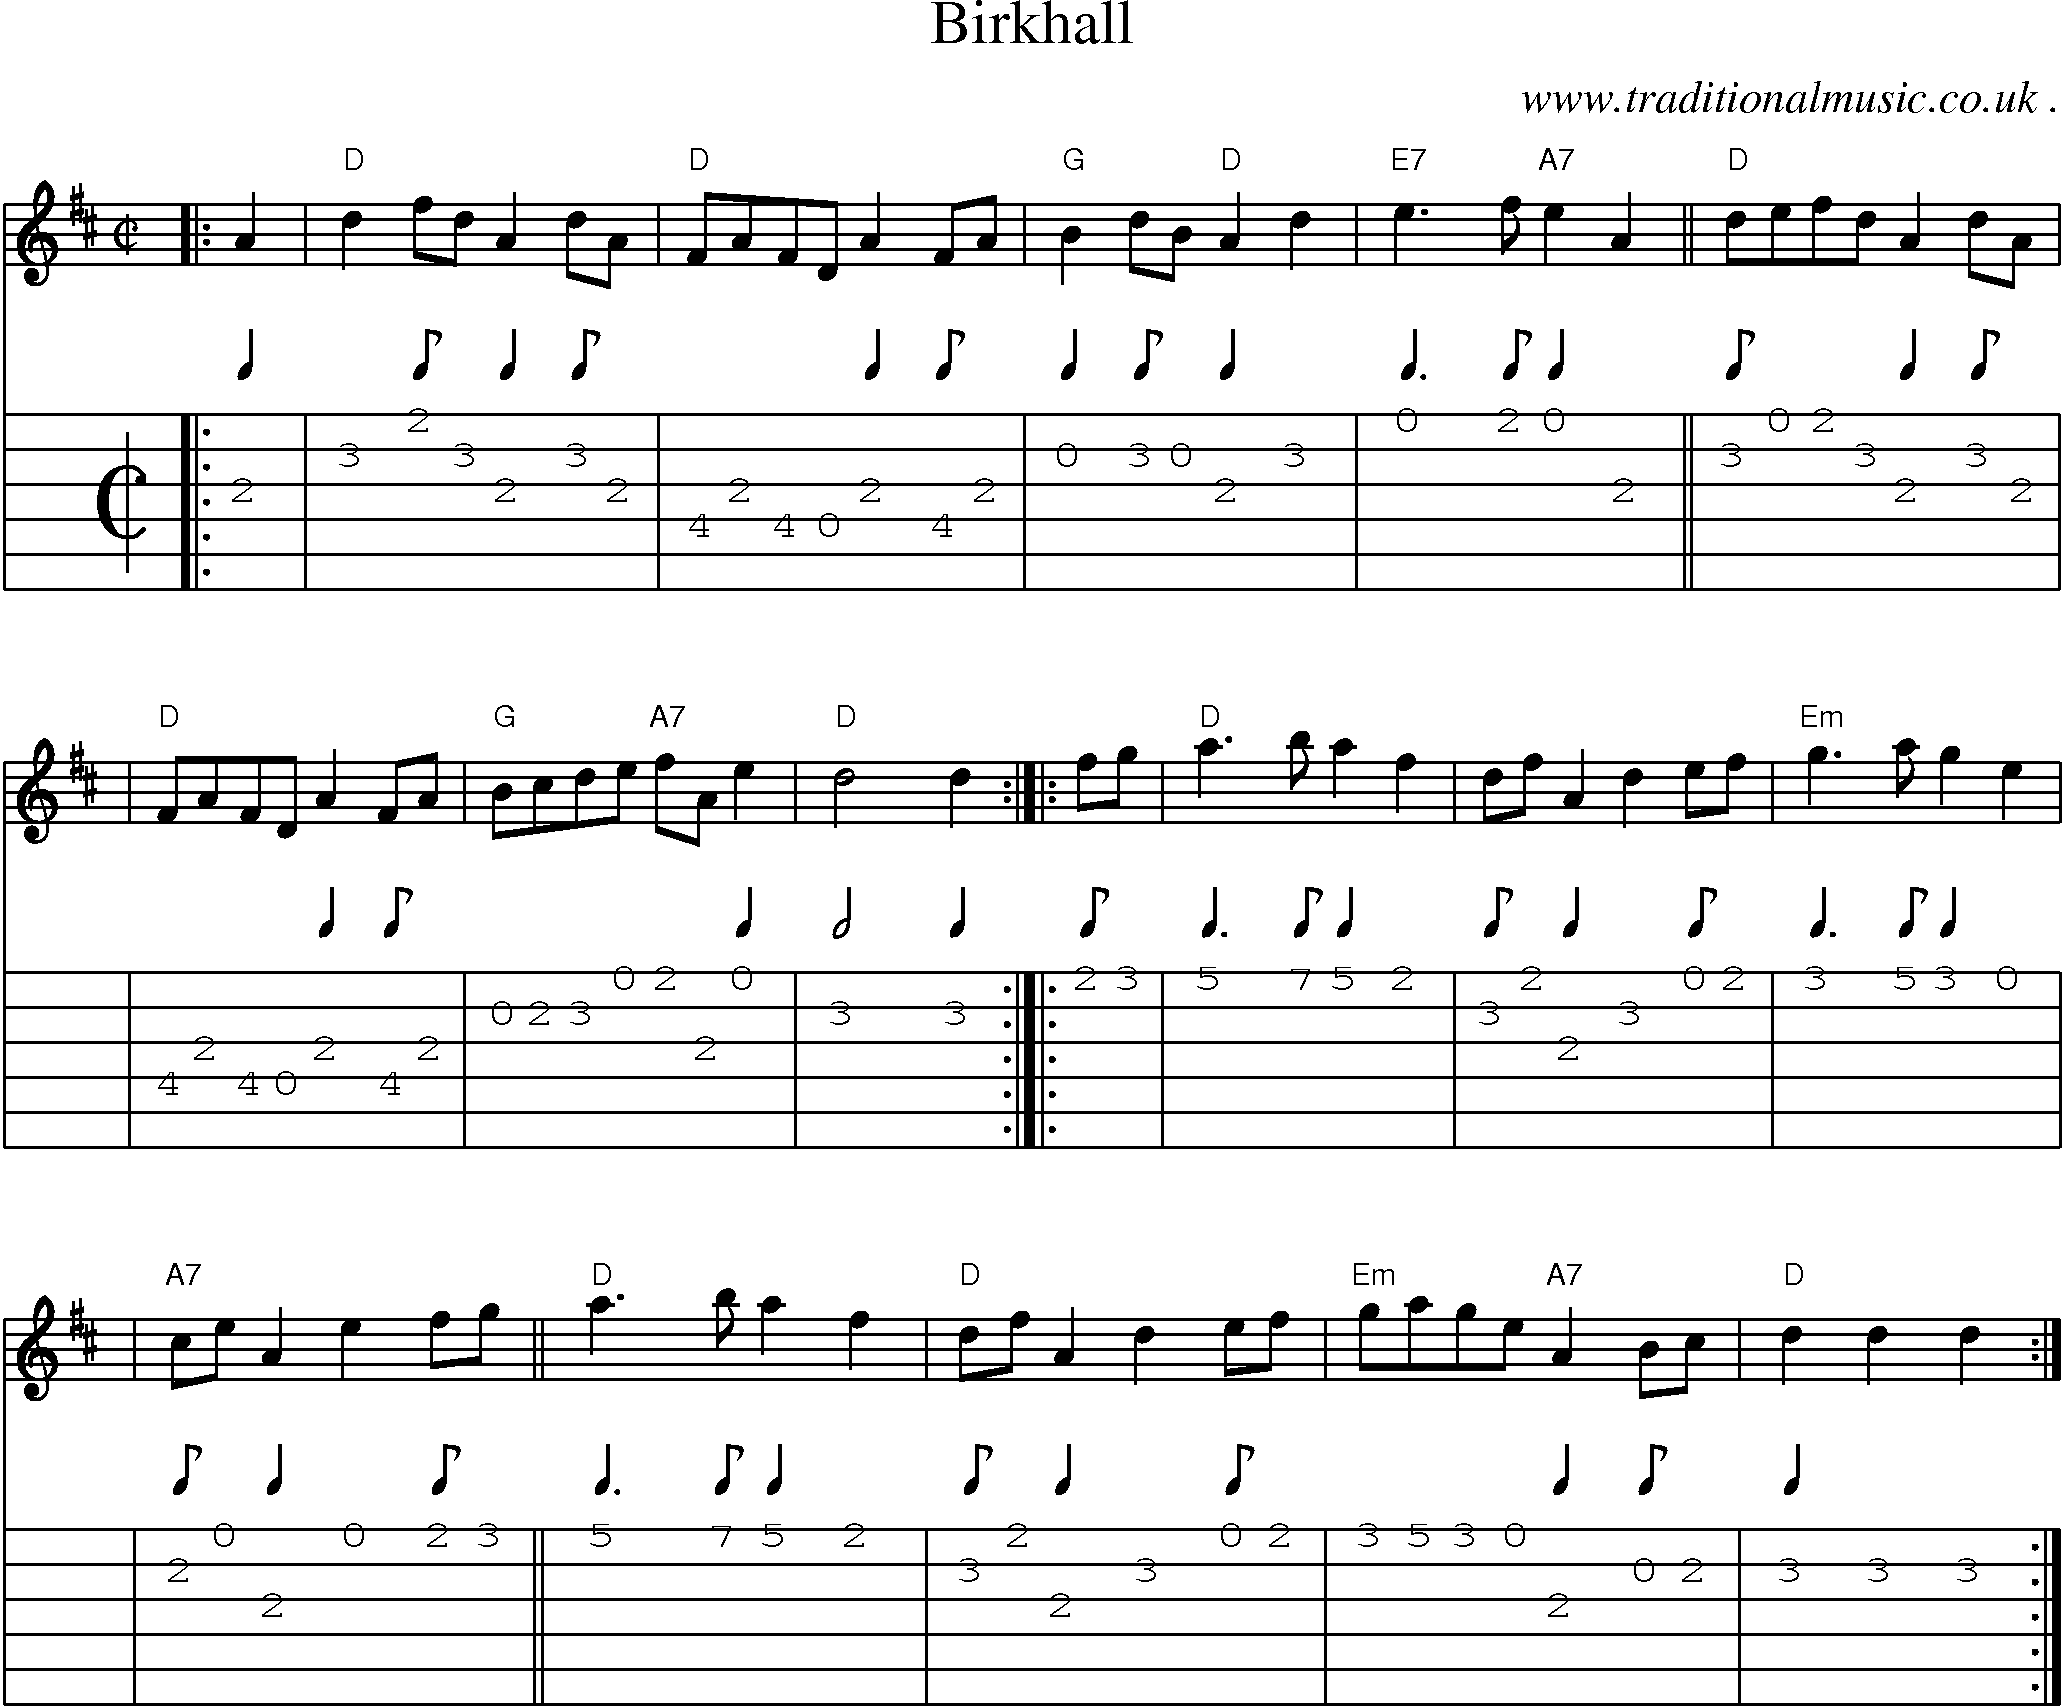 Sheet-music  score, Chords and Guitar Tabs for Birkhall